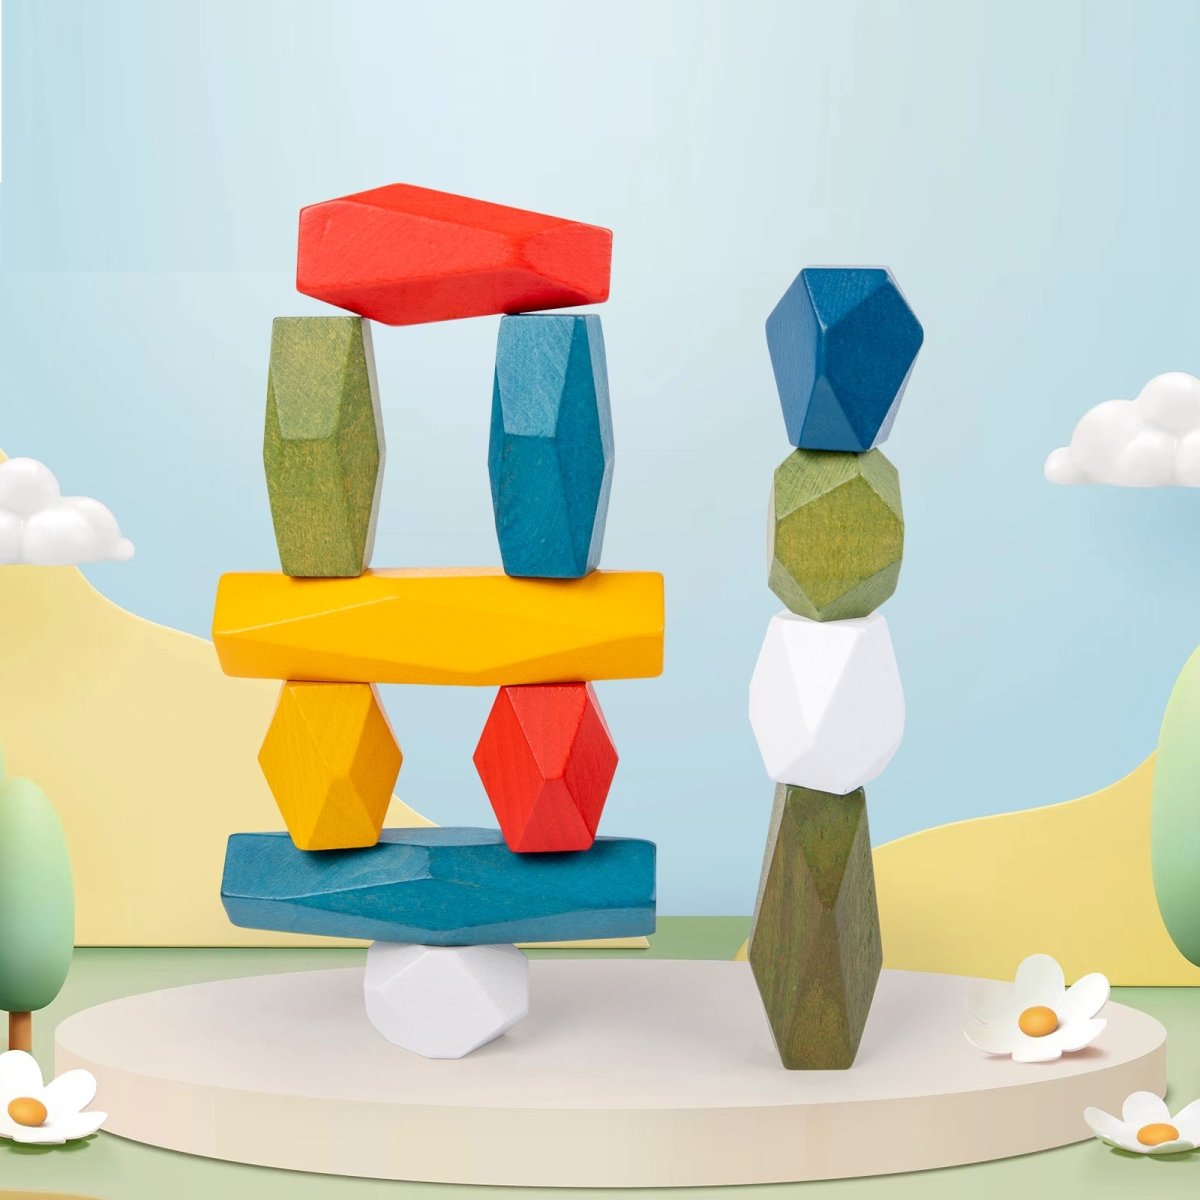 Jumbo Colored Stacking Stones - Jumbo Colored Stacking Stones - Curious Melodies